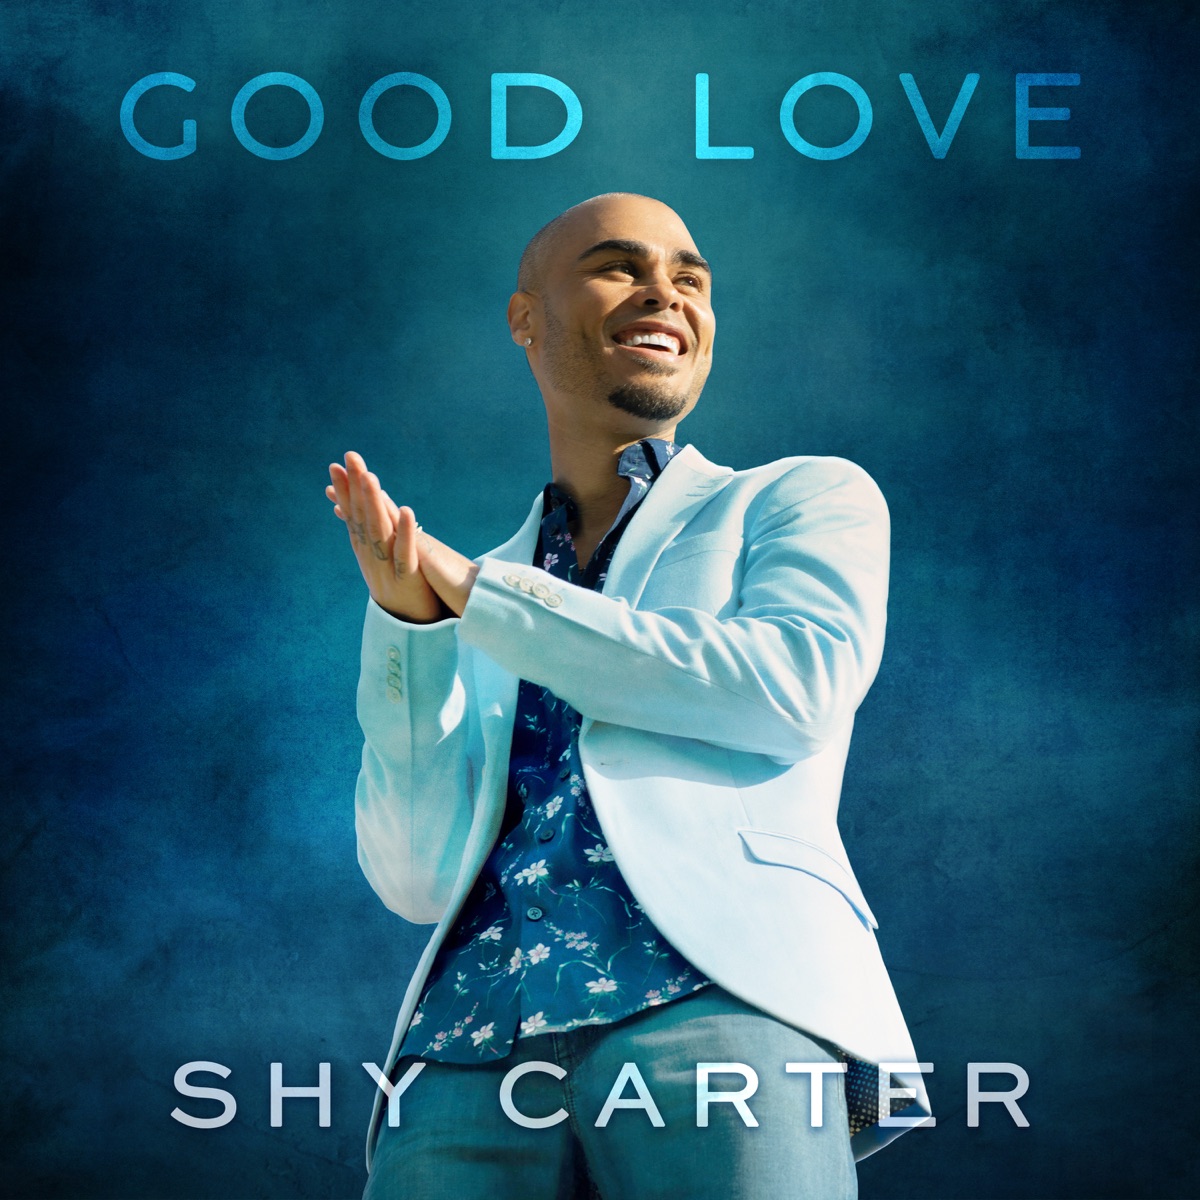 love is good song